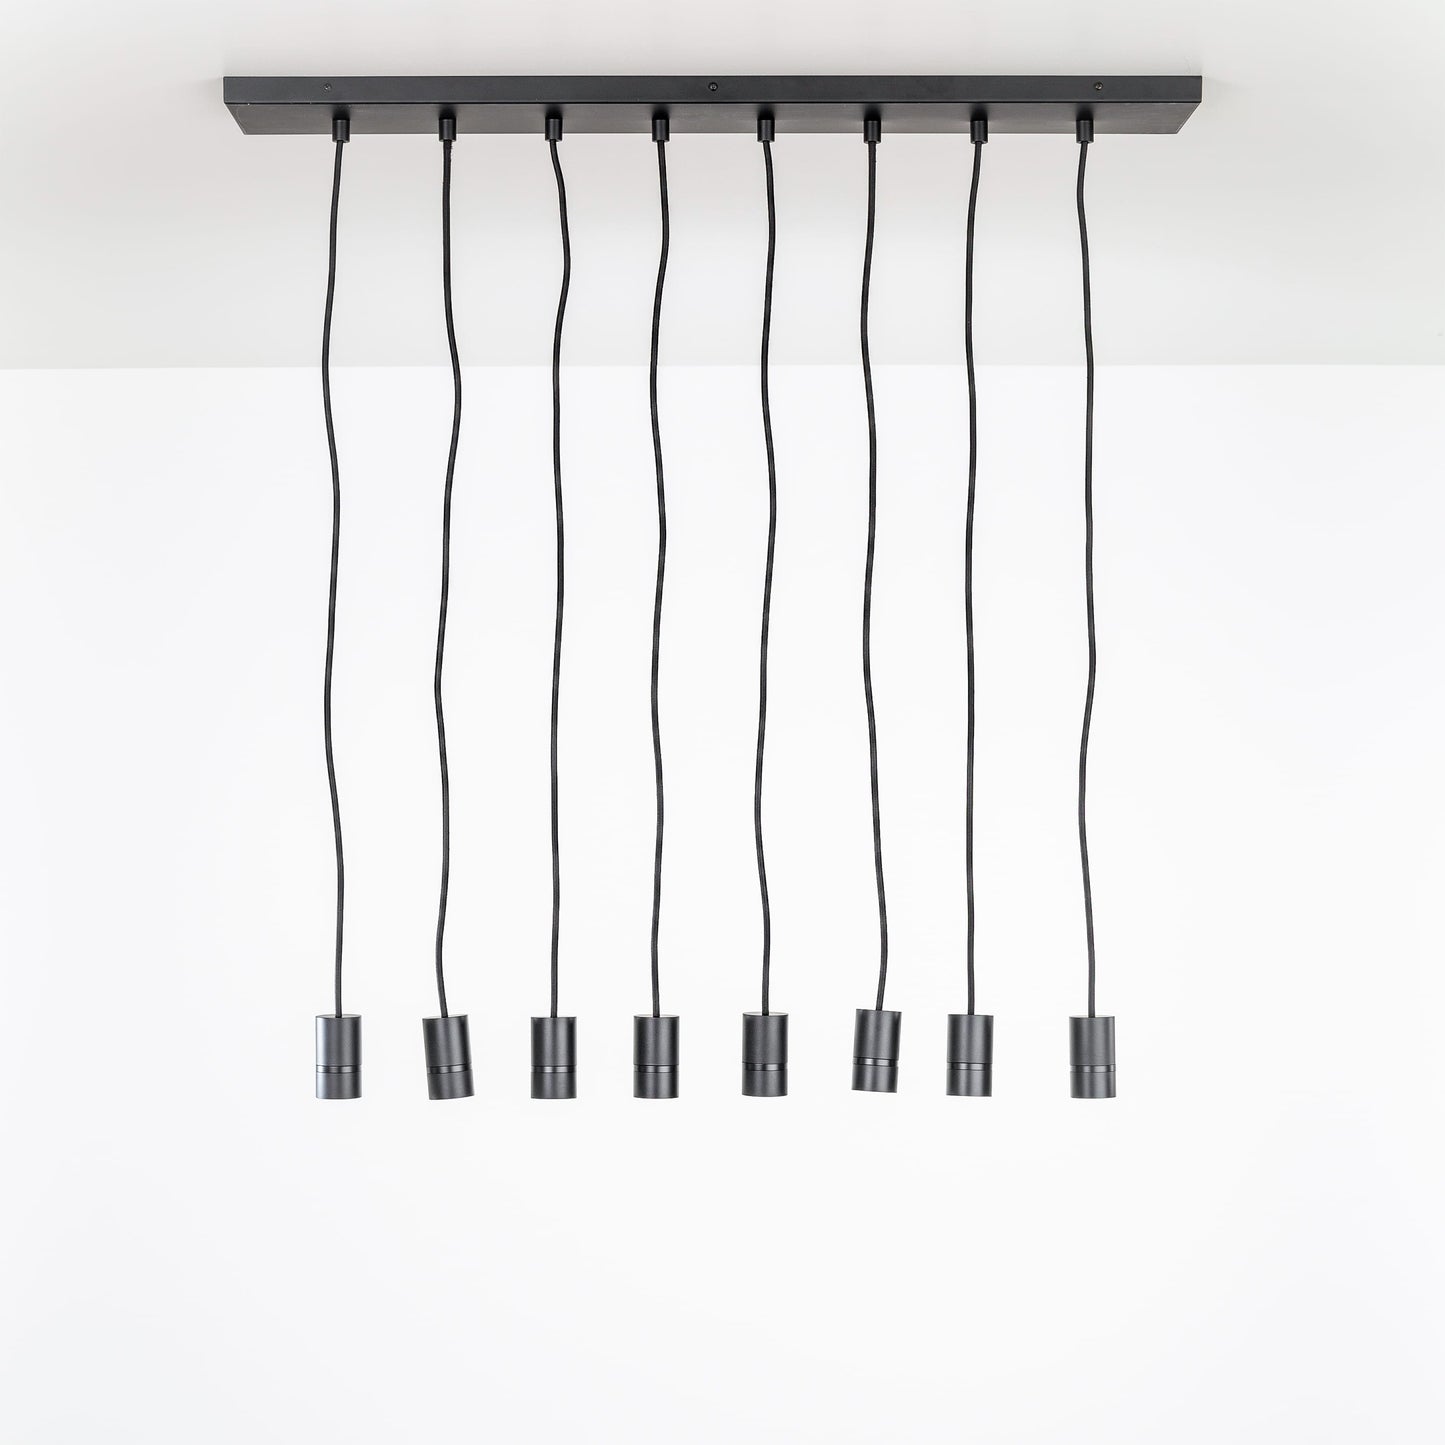 AiO (All-in-One) 8-Line Chandelier